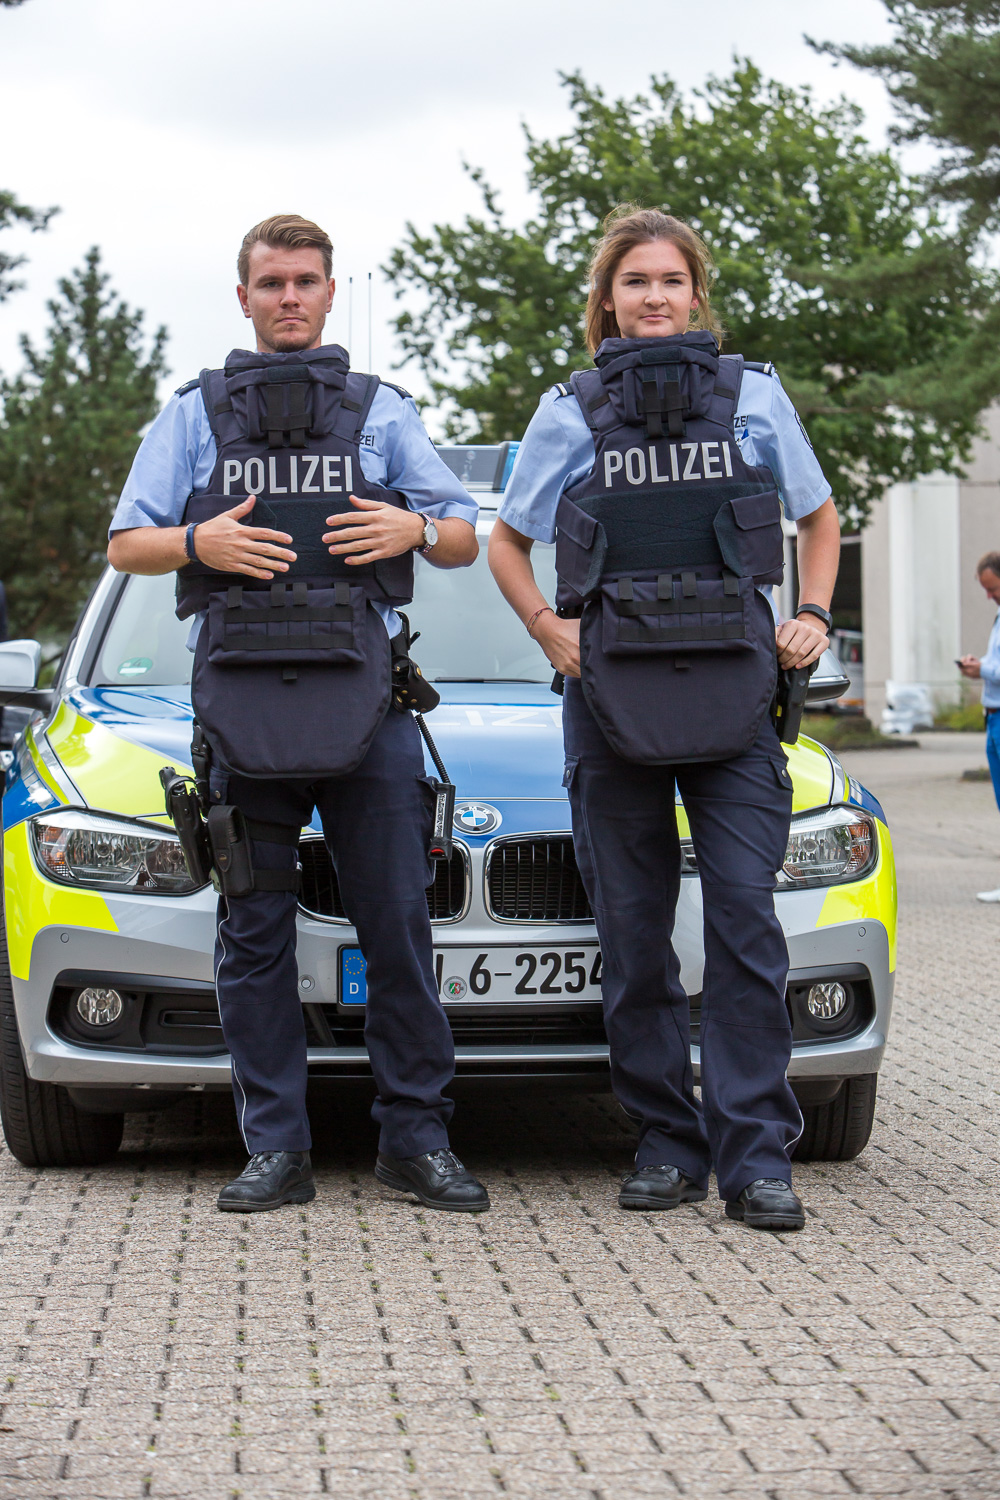 New firearms vests from the NRW police